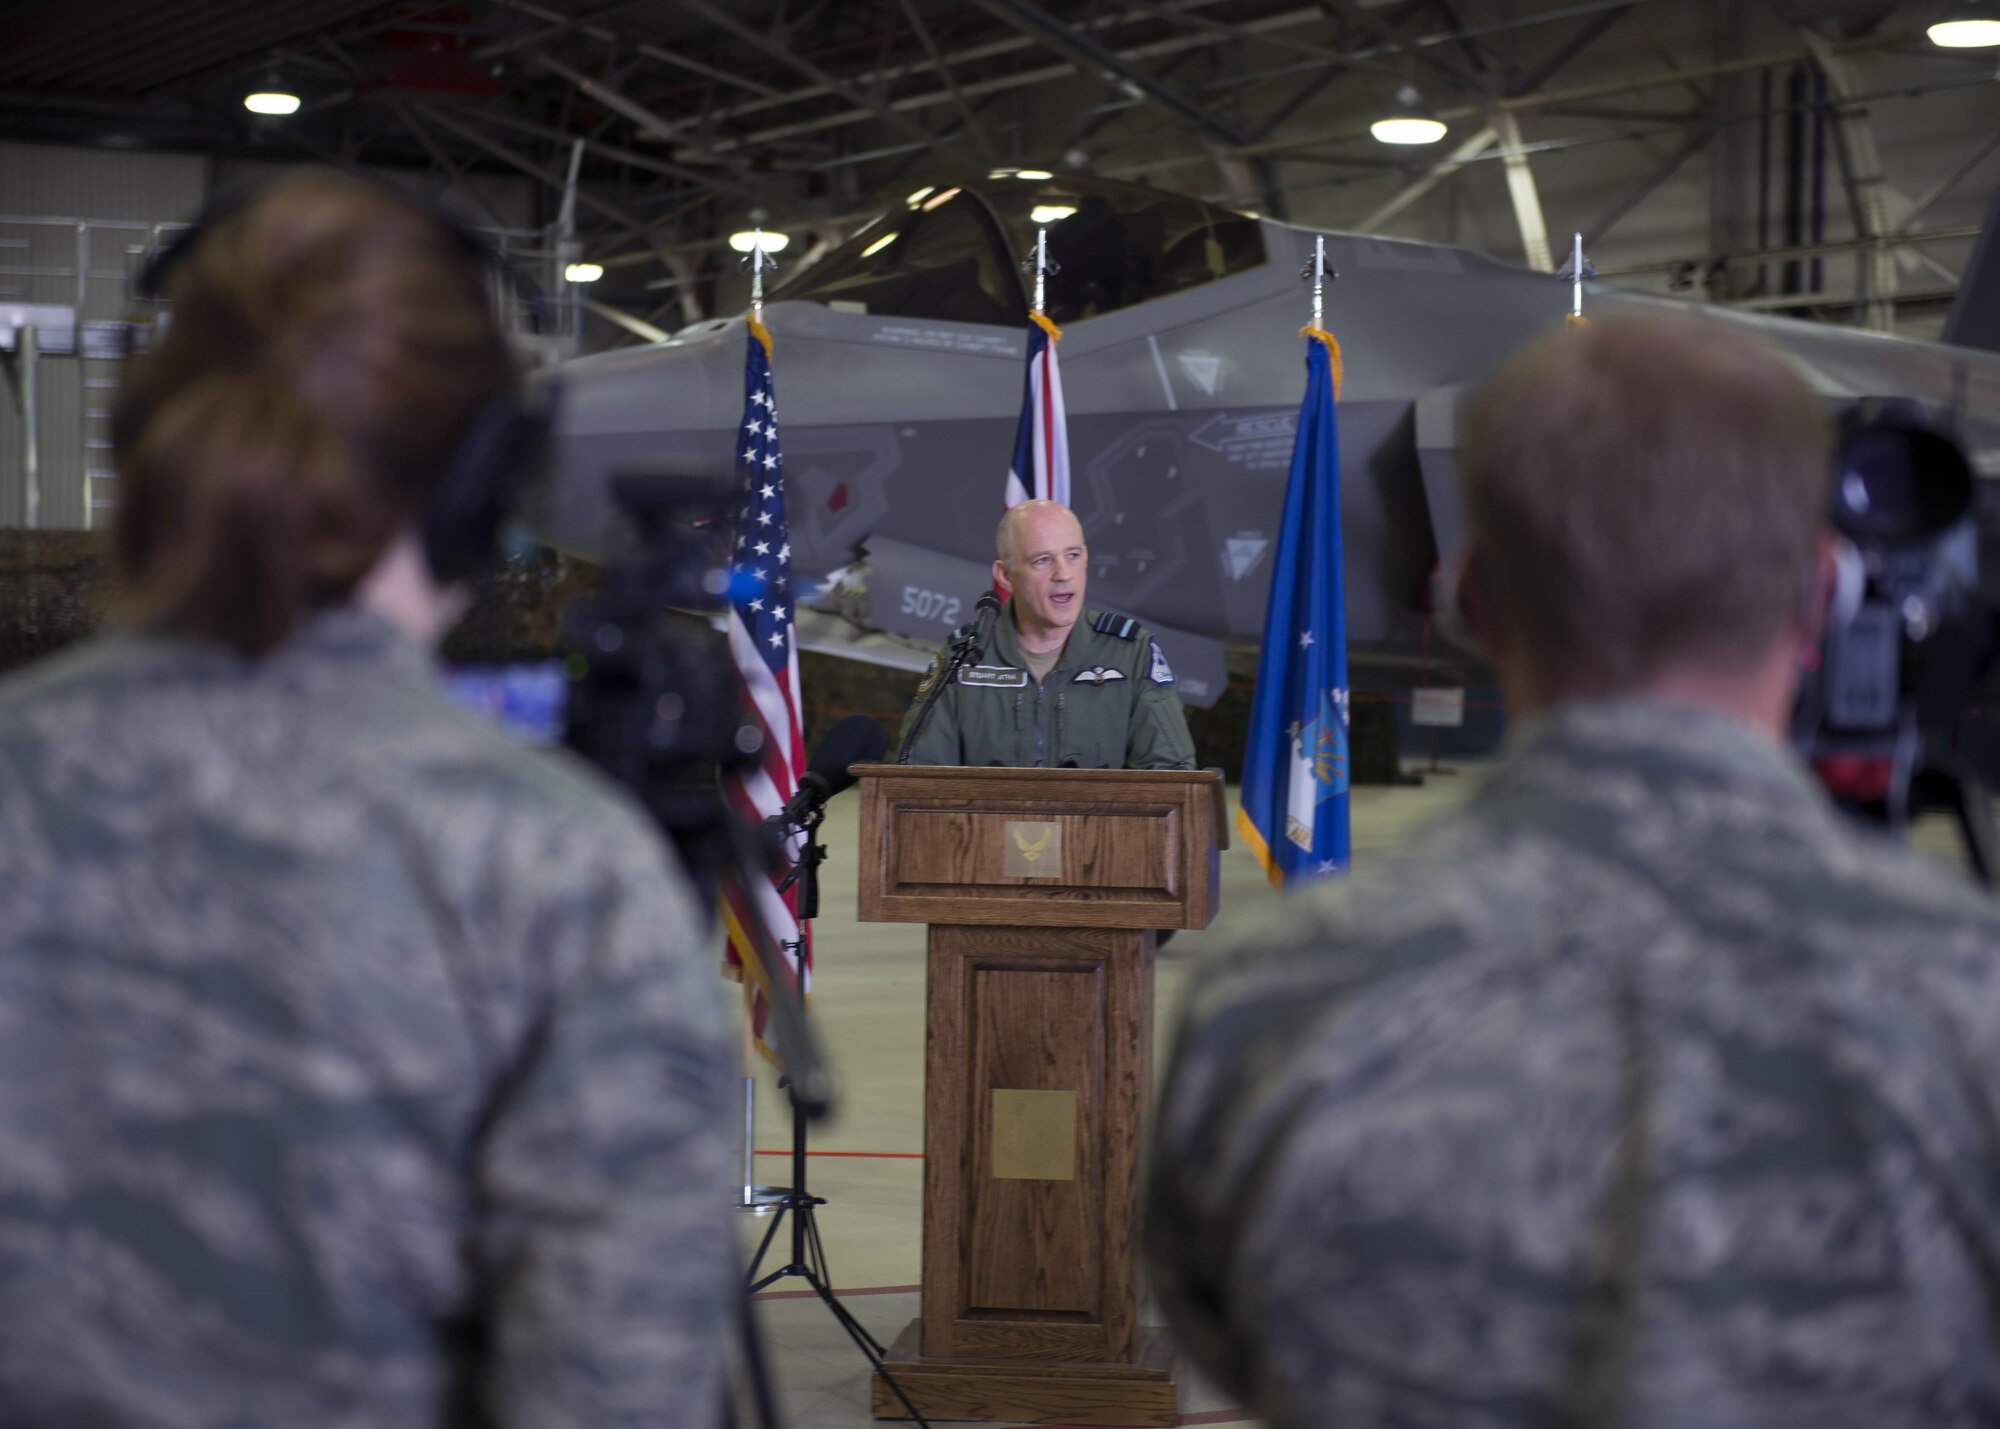 Royal Air Force Air Marshal Stuart Atha, Deputy Commander Operations, speaks during a press conference at Royal Air Force Lakenheath, England, April 19, 2017. At the press conference, an F-35 Lightning II, an F-15C Eagle, and an RAF Typhoon FGRA were on display. (U.S. Air Force photo/Senior Airman Malcolm Mayfield)